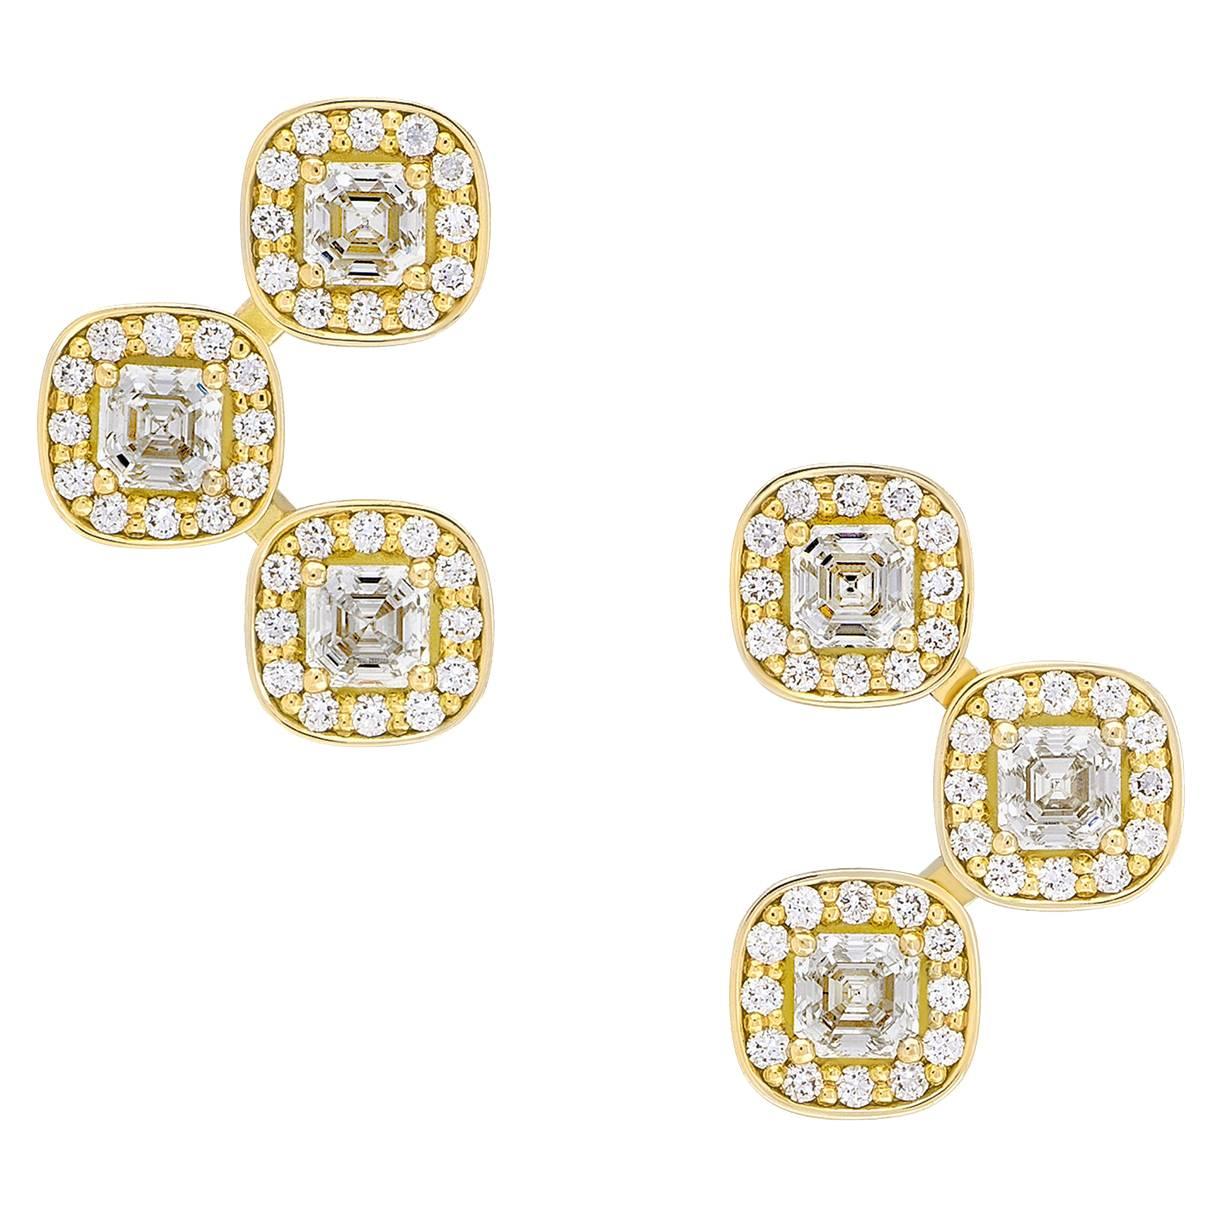 Inspired by the stunning and repitious patterns of the Magnificent Bird of Paradise, the Magnificent Asscher Earrings are a bold yet timeless statement piece. Featuring six stunning natural Asscher cut diamonds (1.8 tct) and 0.36 tct natural